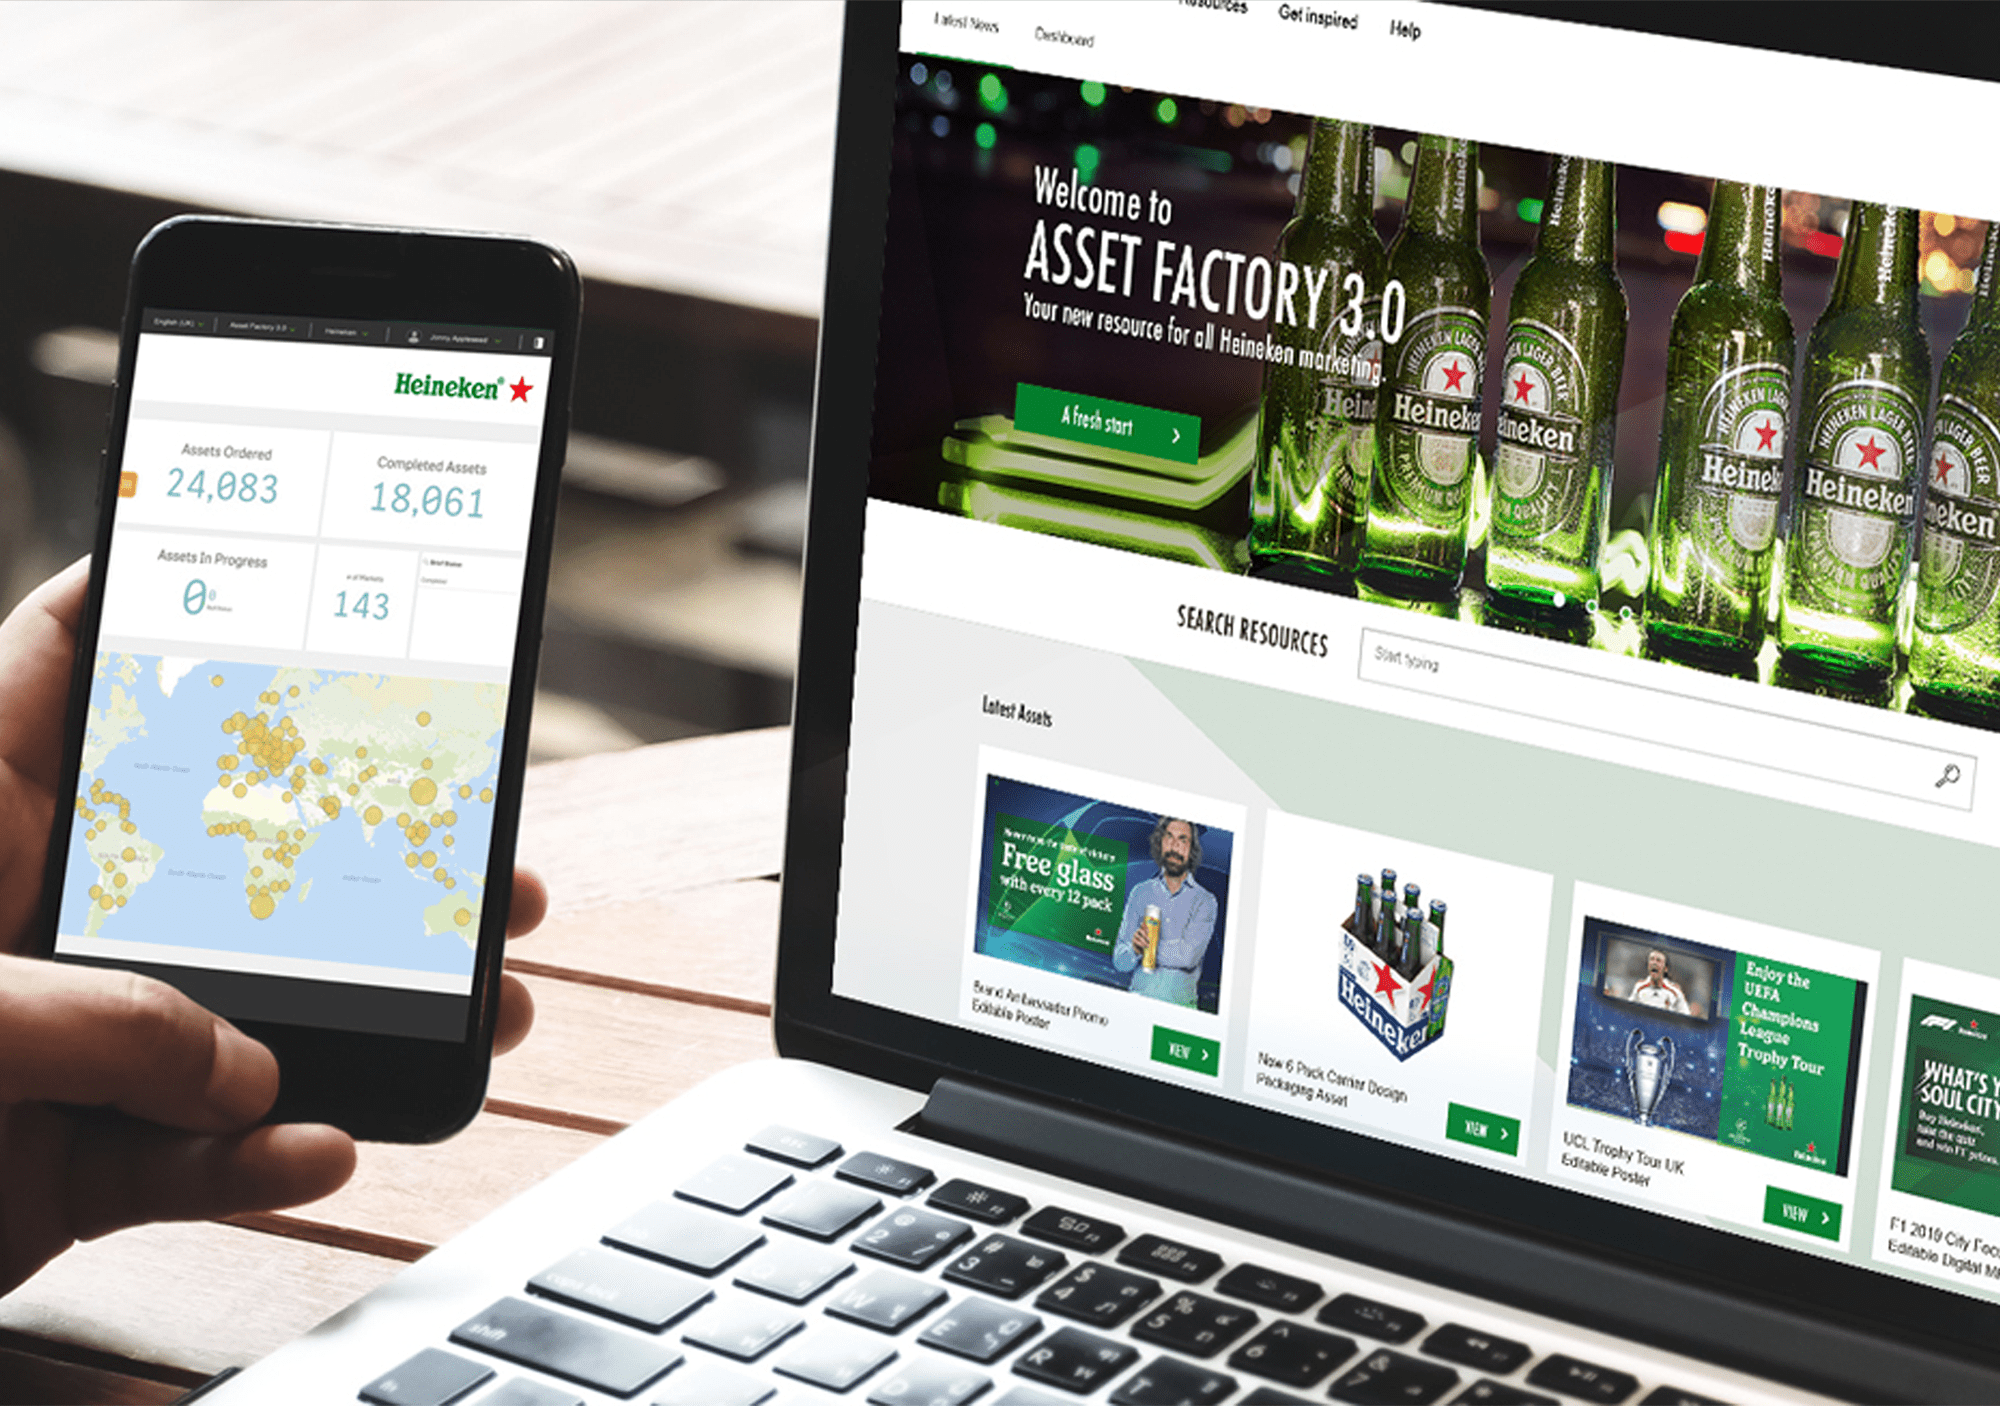 Give all marketers ready-to-use on-brand content, campaigns and dynamic playbooks, for instant localisation. Just like Heineken does.